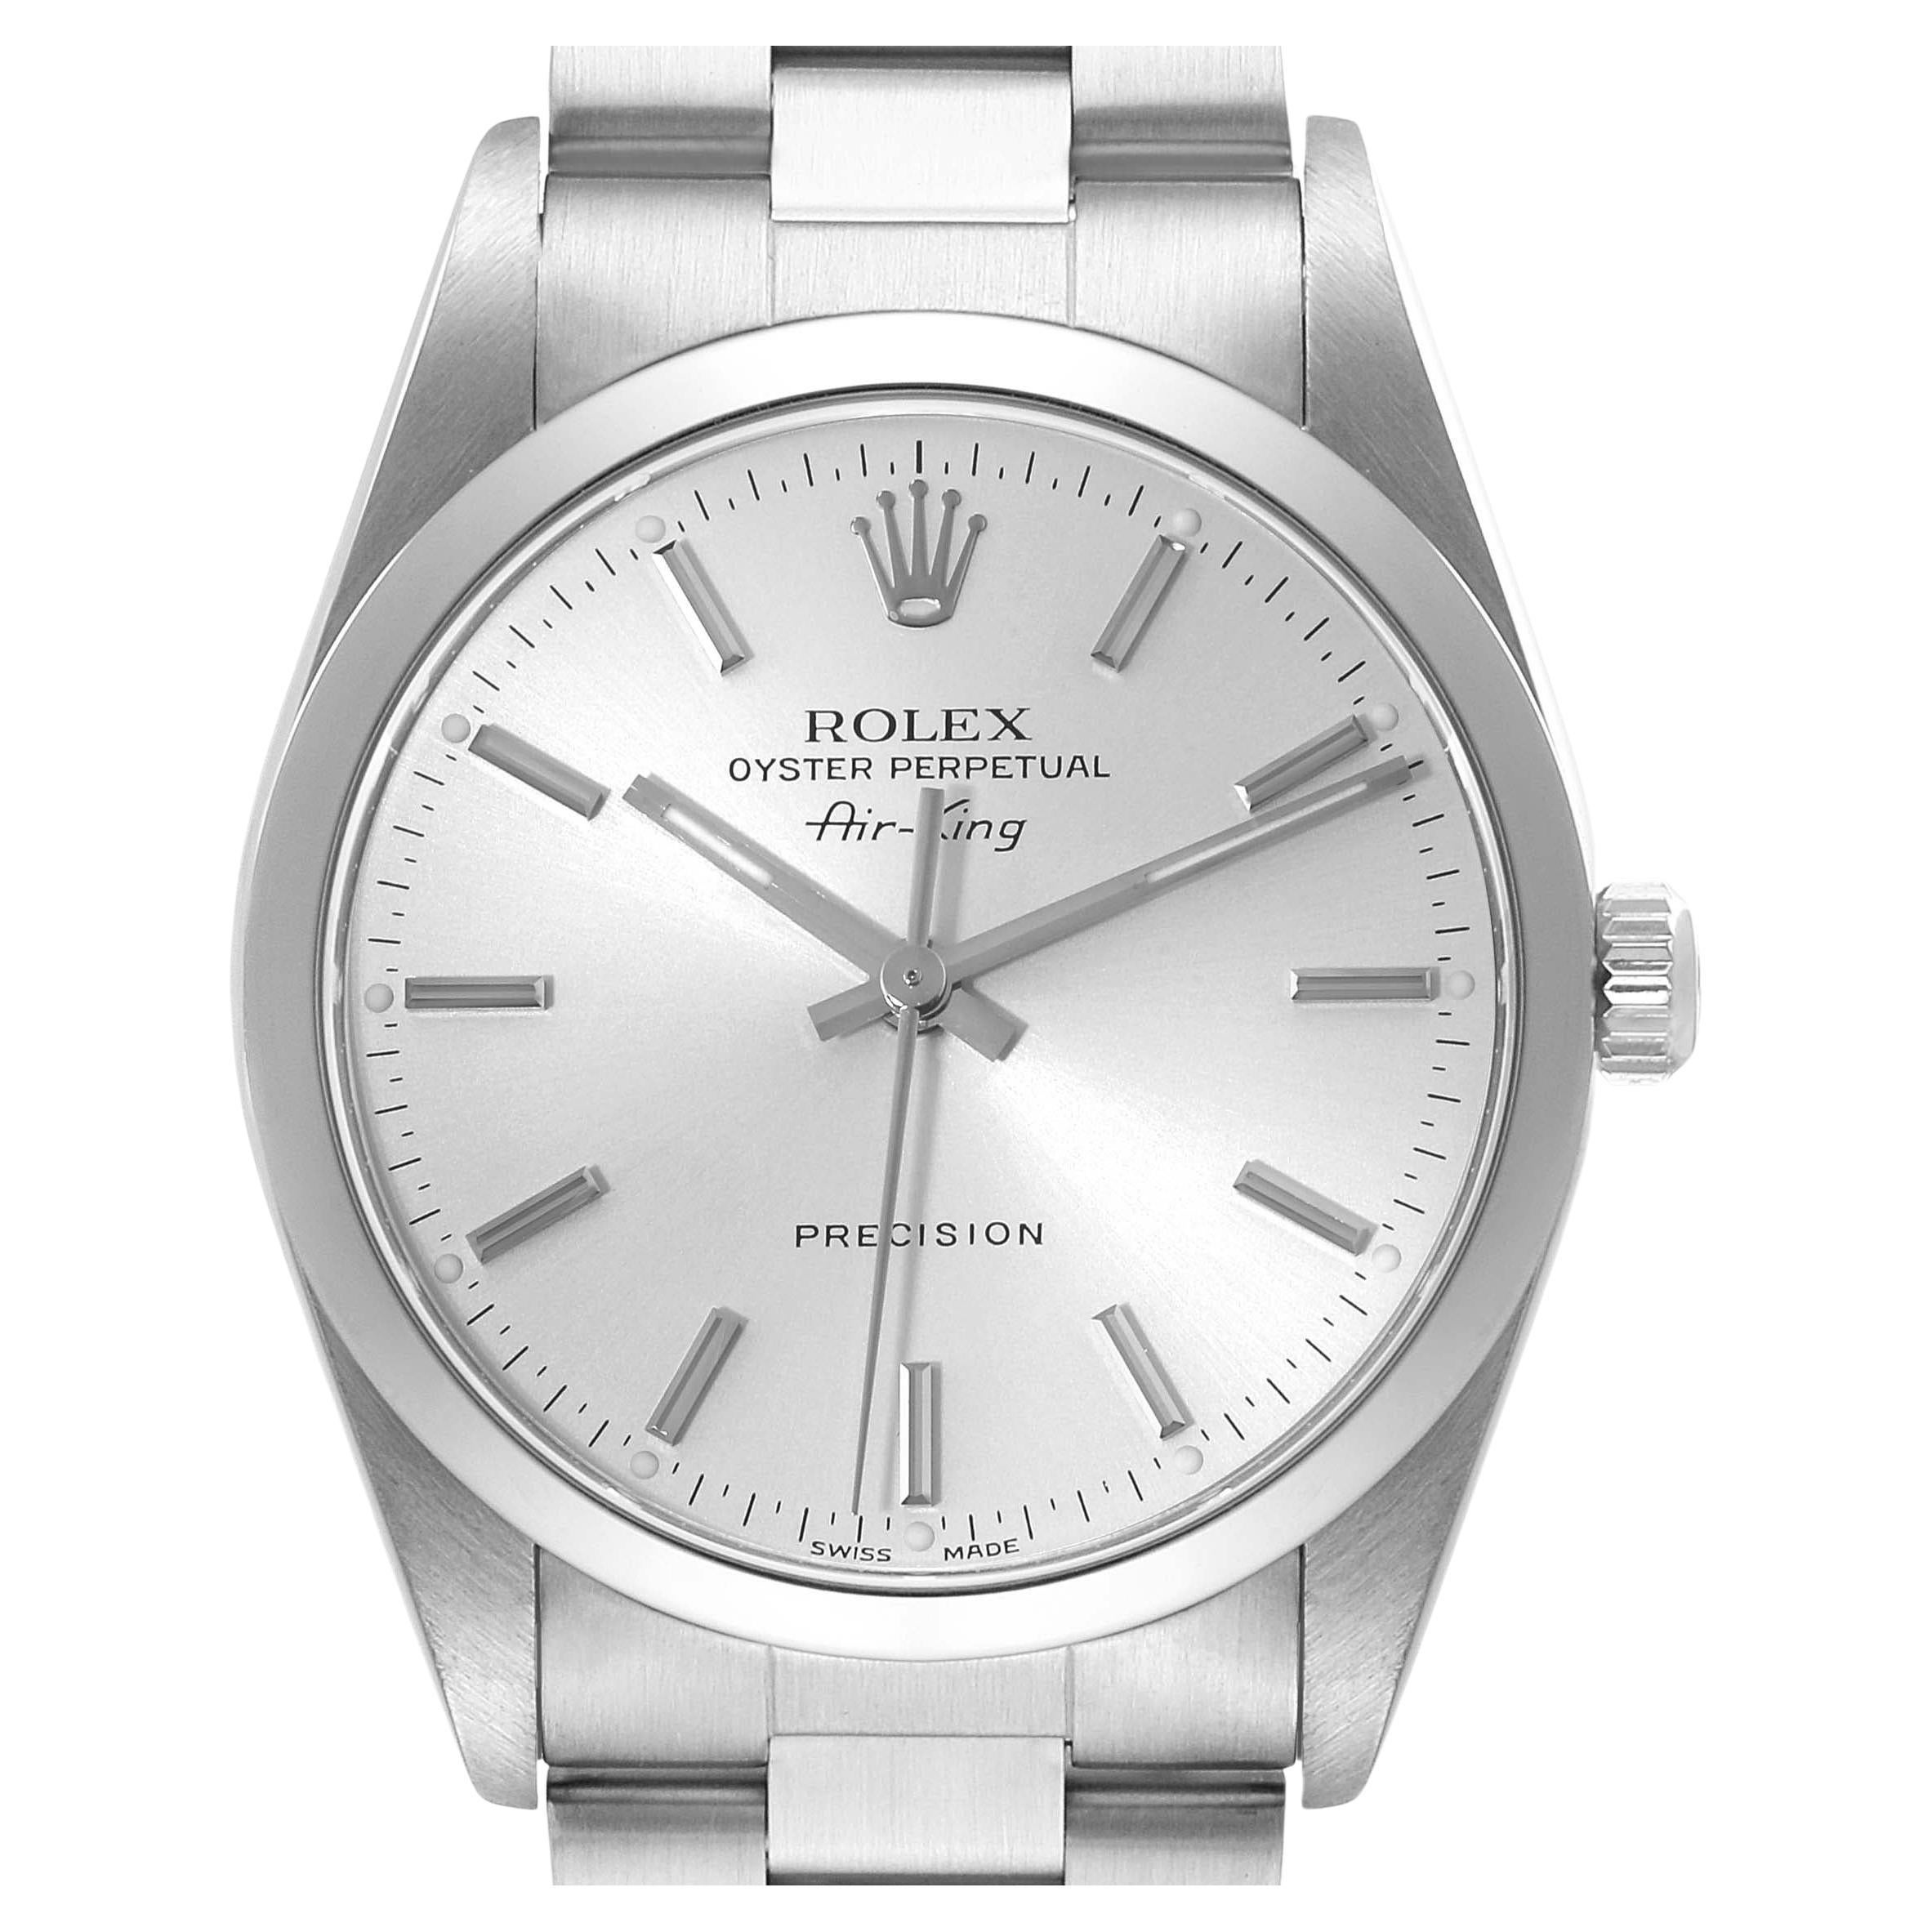 Rolex Air King Silver Dial Smooth Bezel Steel Mens Watch 14000